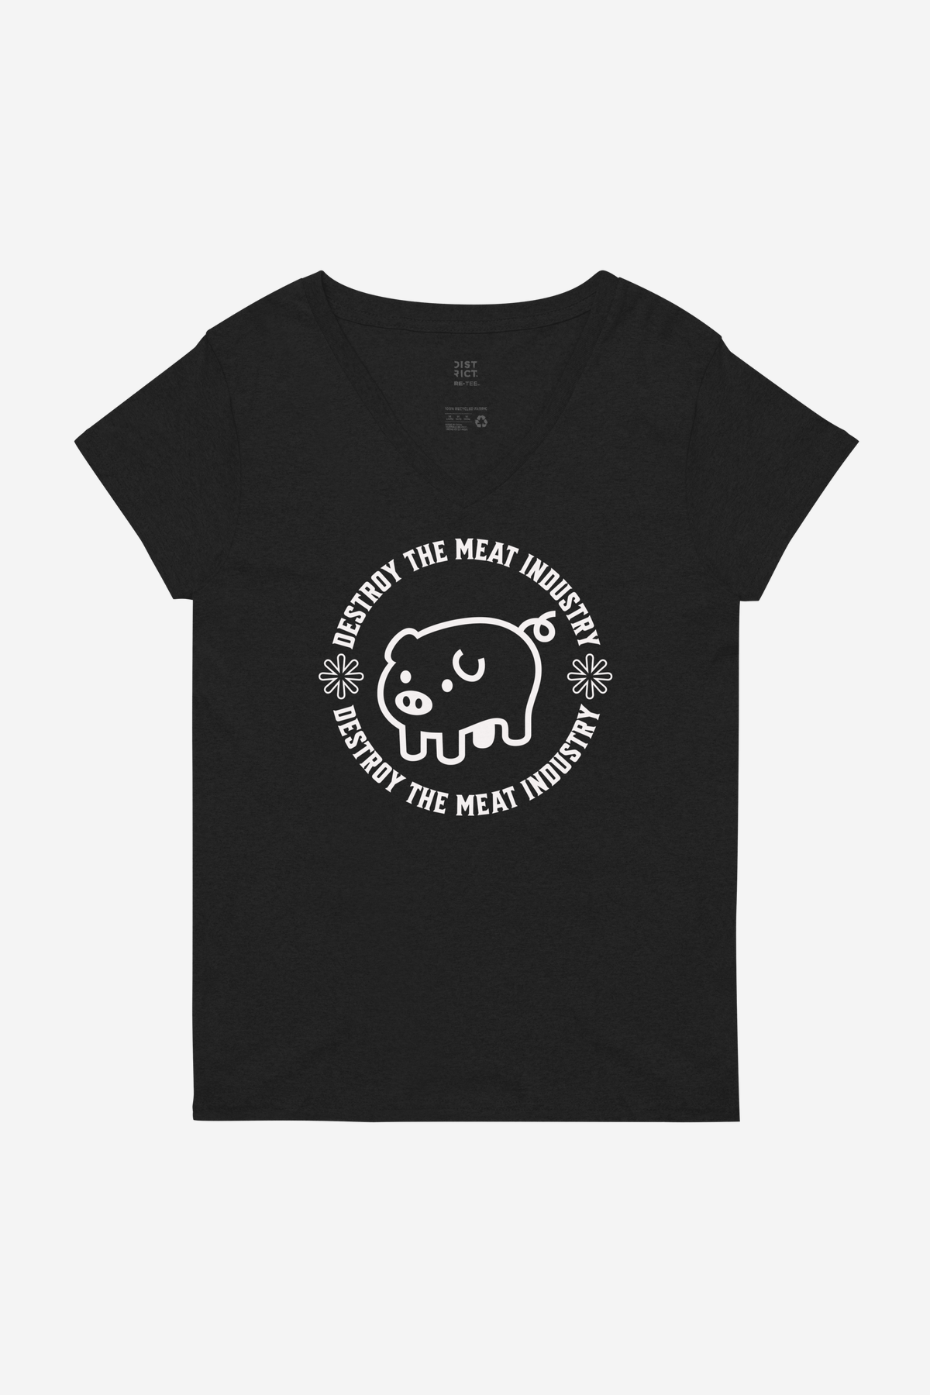 Destroy The Meat Industry Women’s recycled v-neck t-shirt